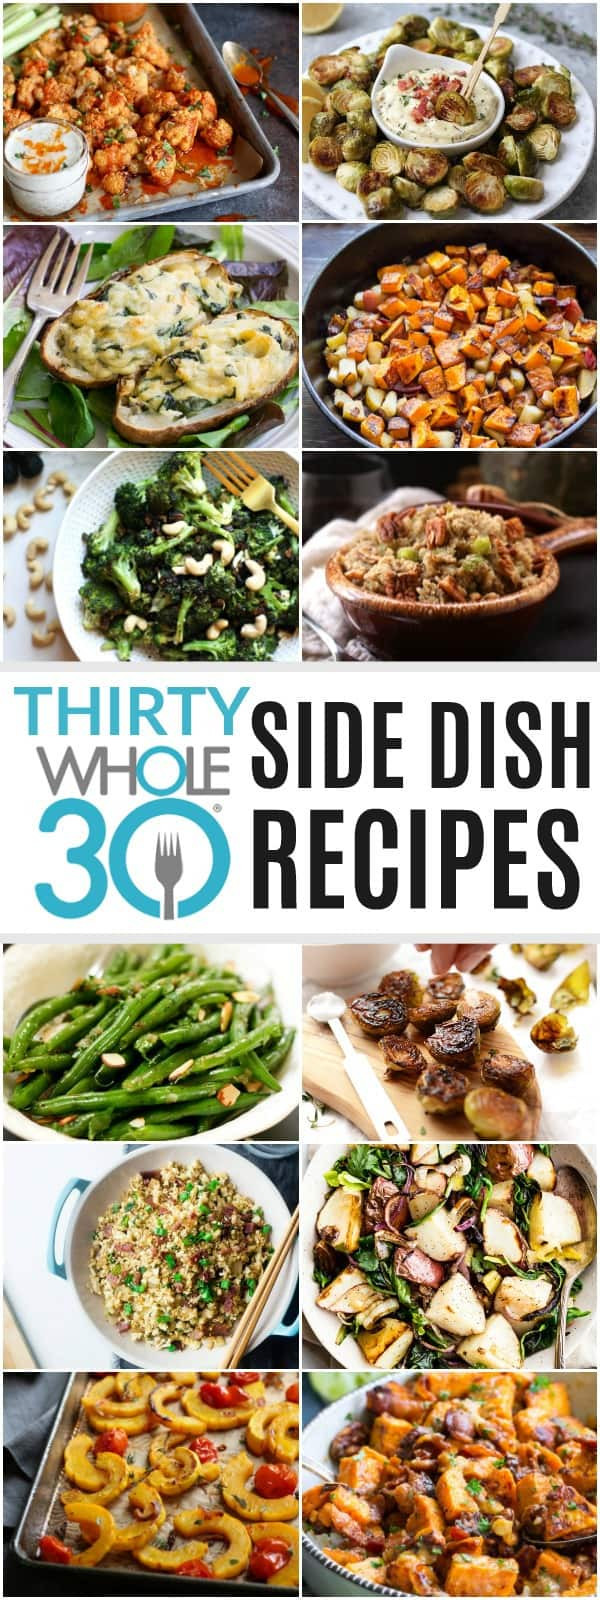 Whole30 Side Dishes
 30 Whole30 Side Dish Recipes The Real Food Dietitians